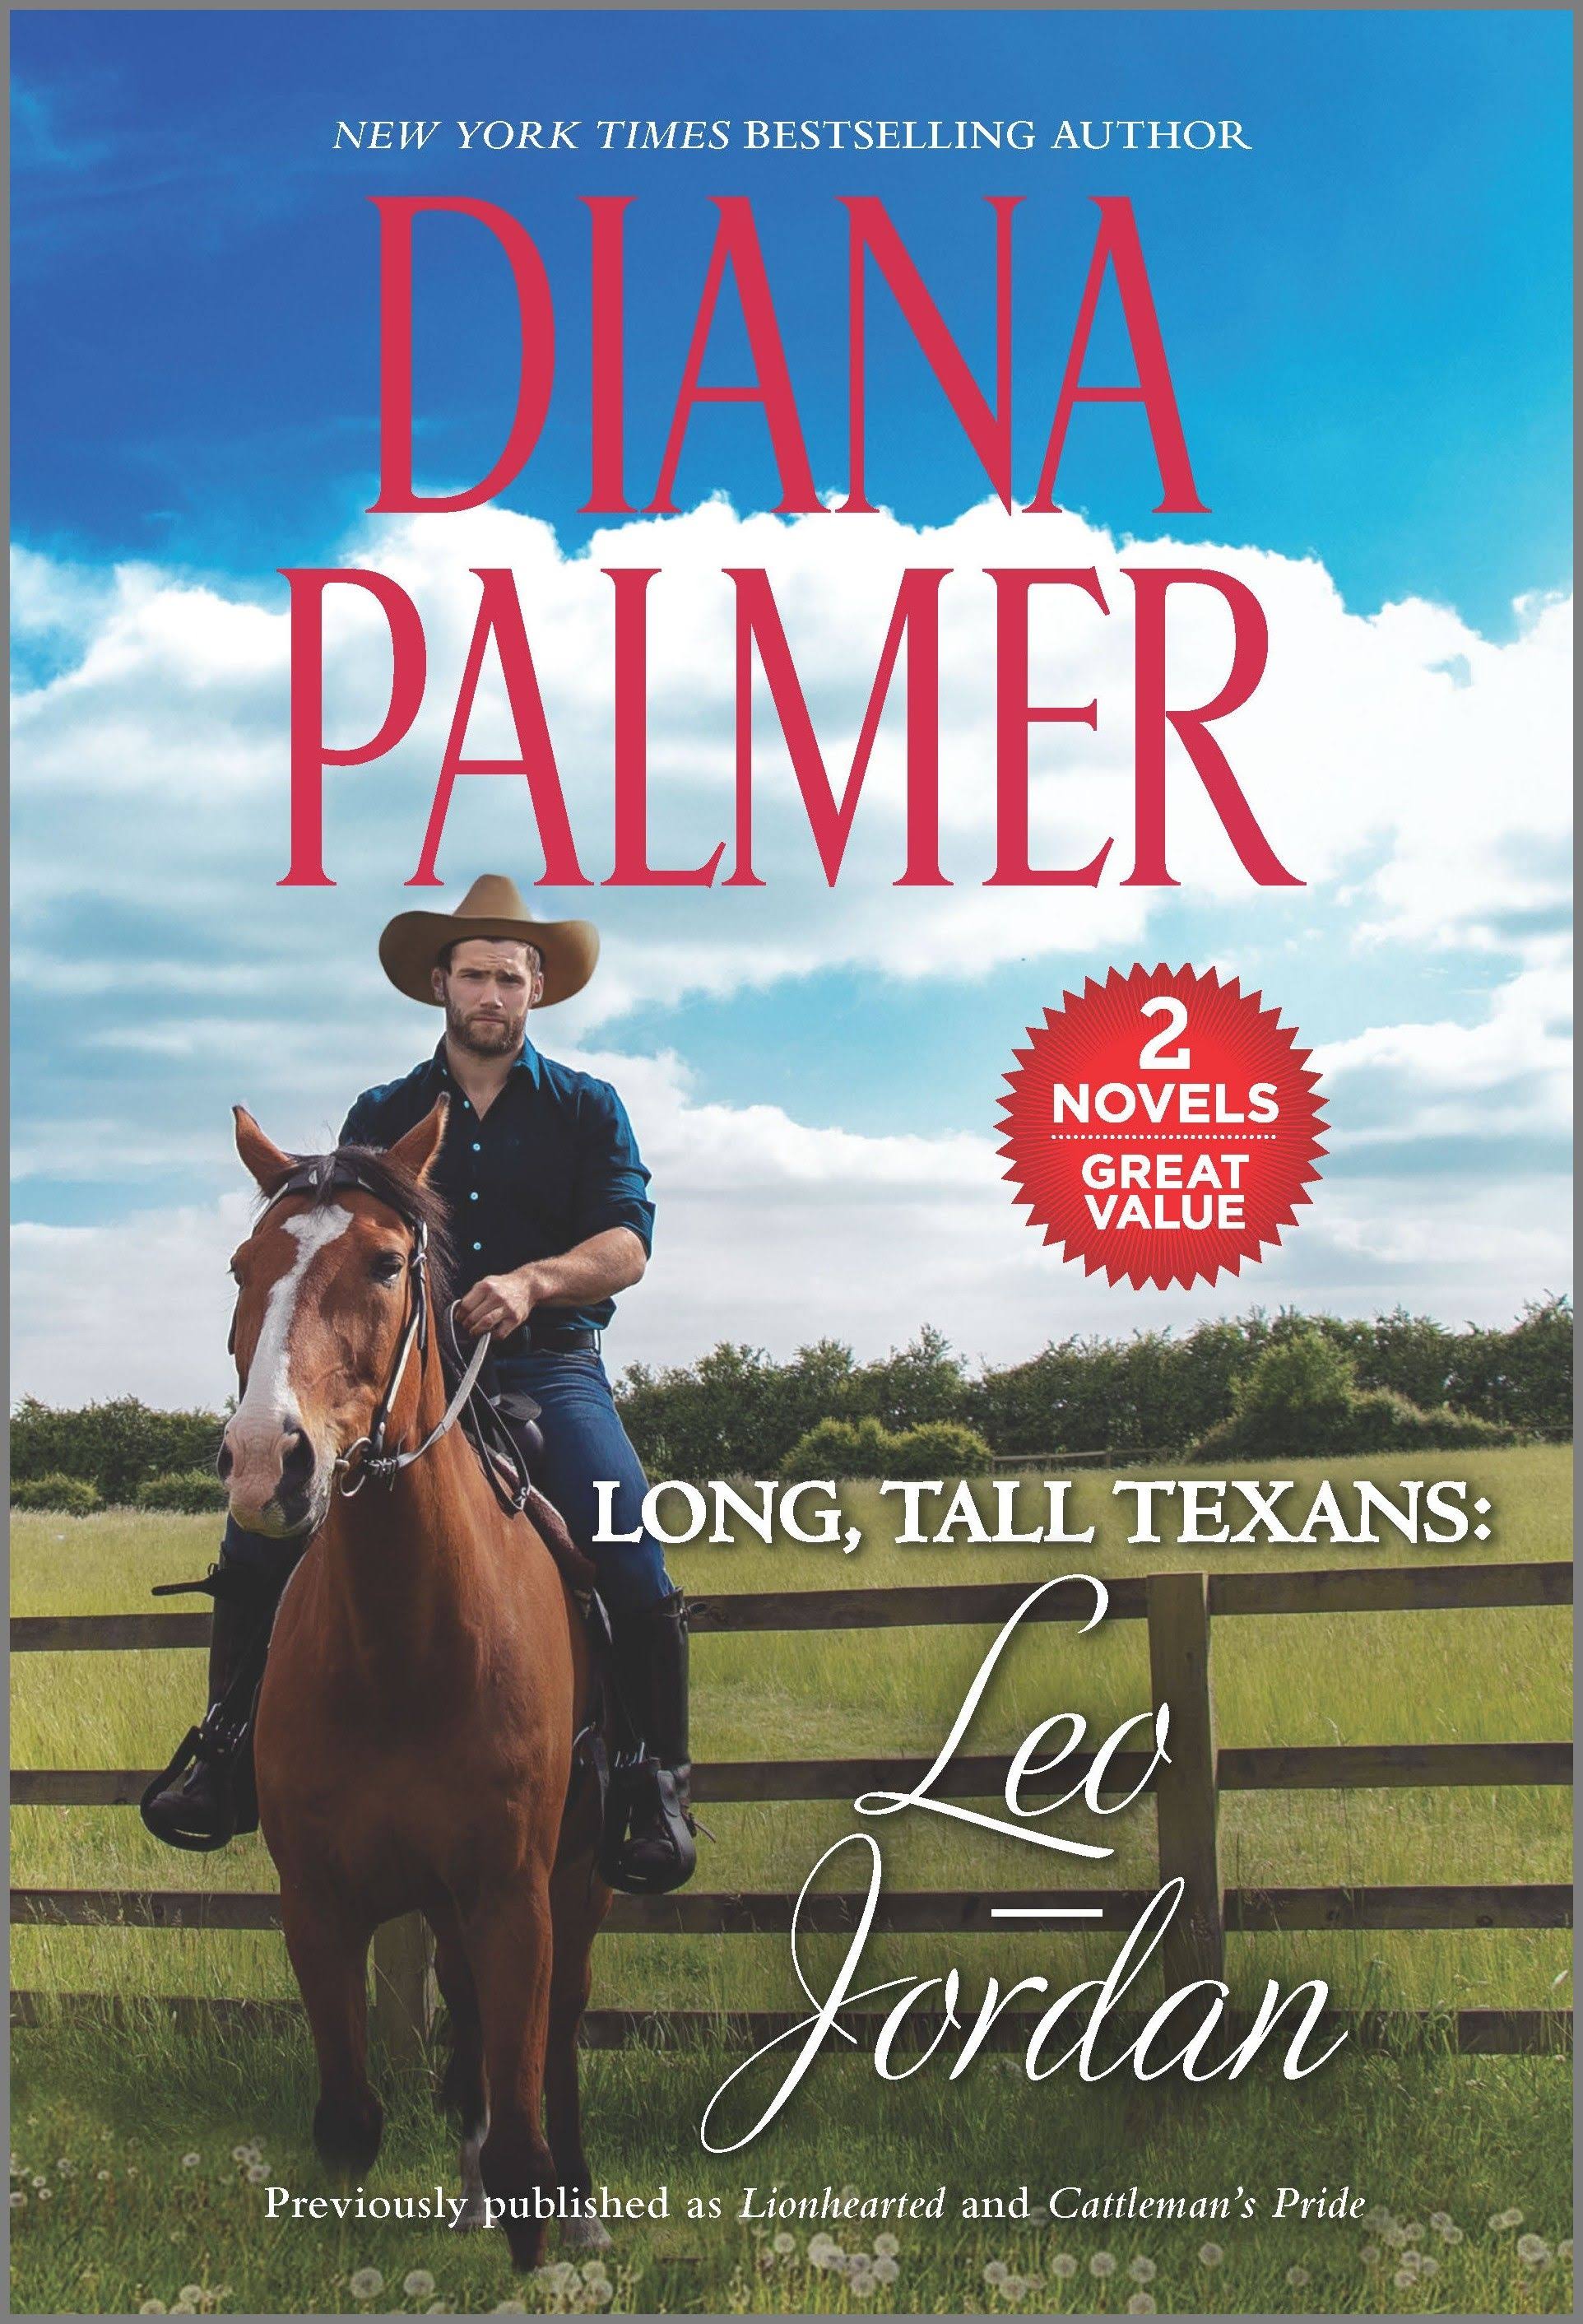 Texas Honor: A 2-In-1 Collection by Palmer, Diana - 1335476946 by Harlequin | Thriftbooks.com